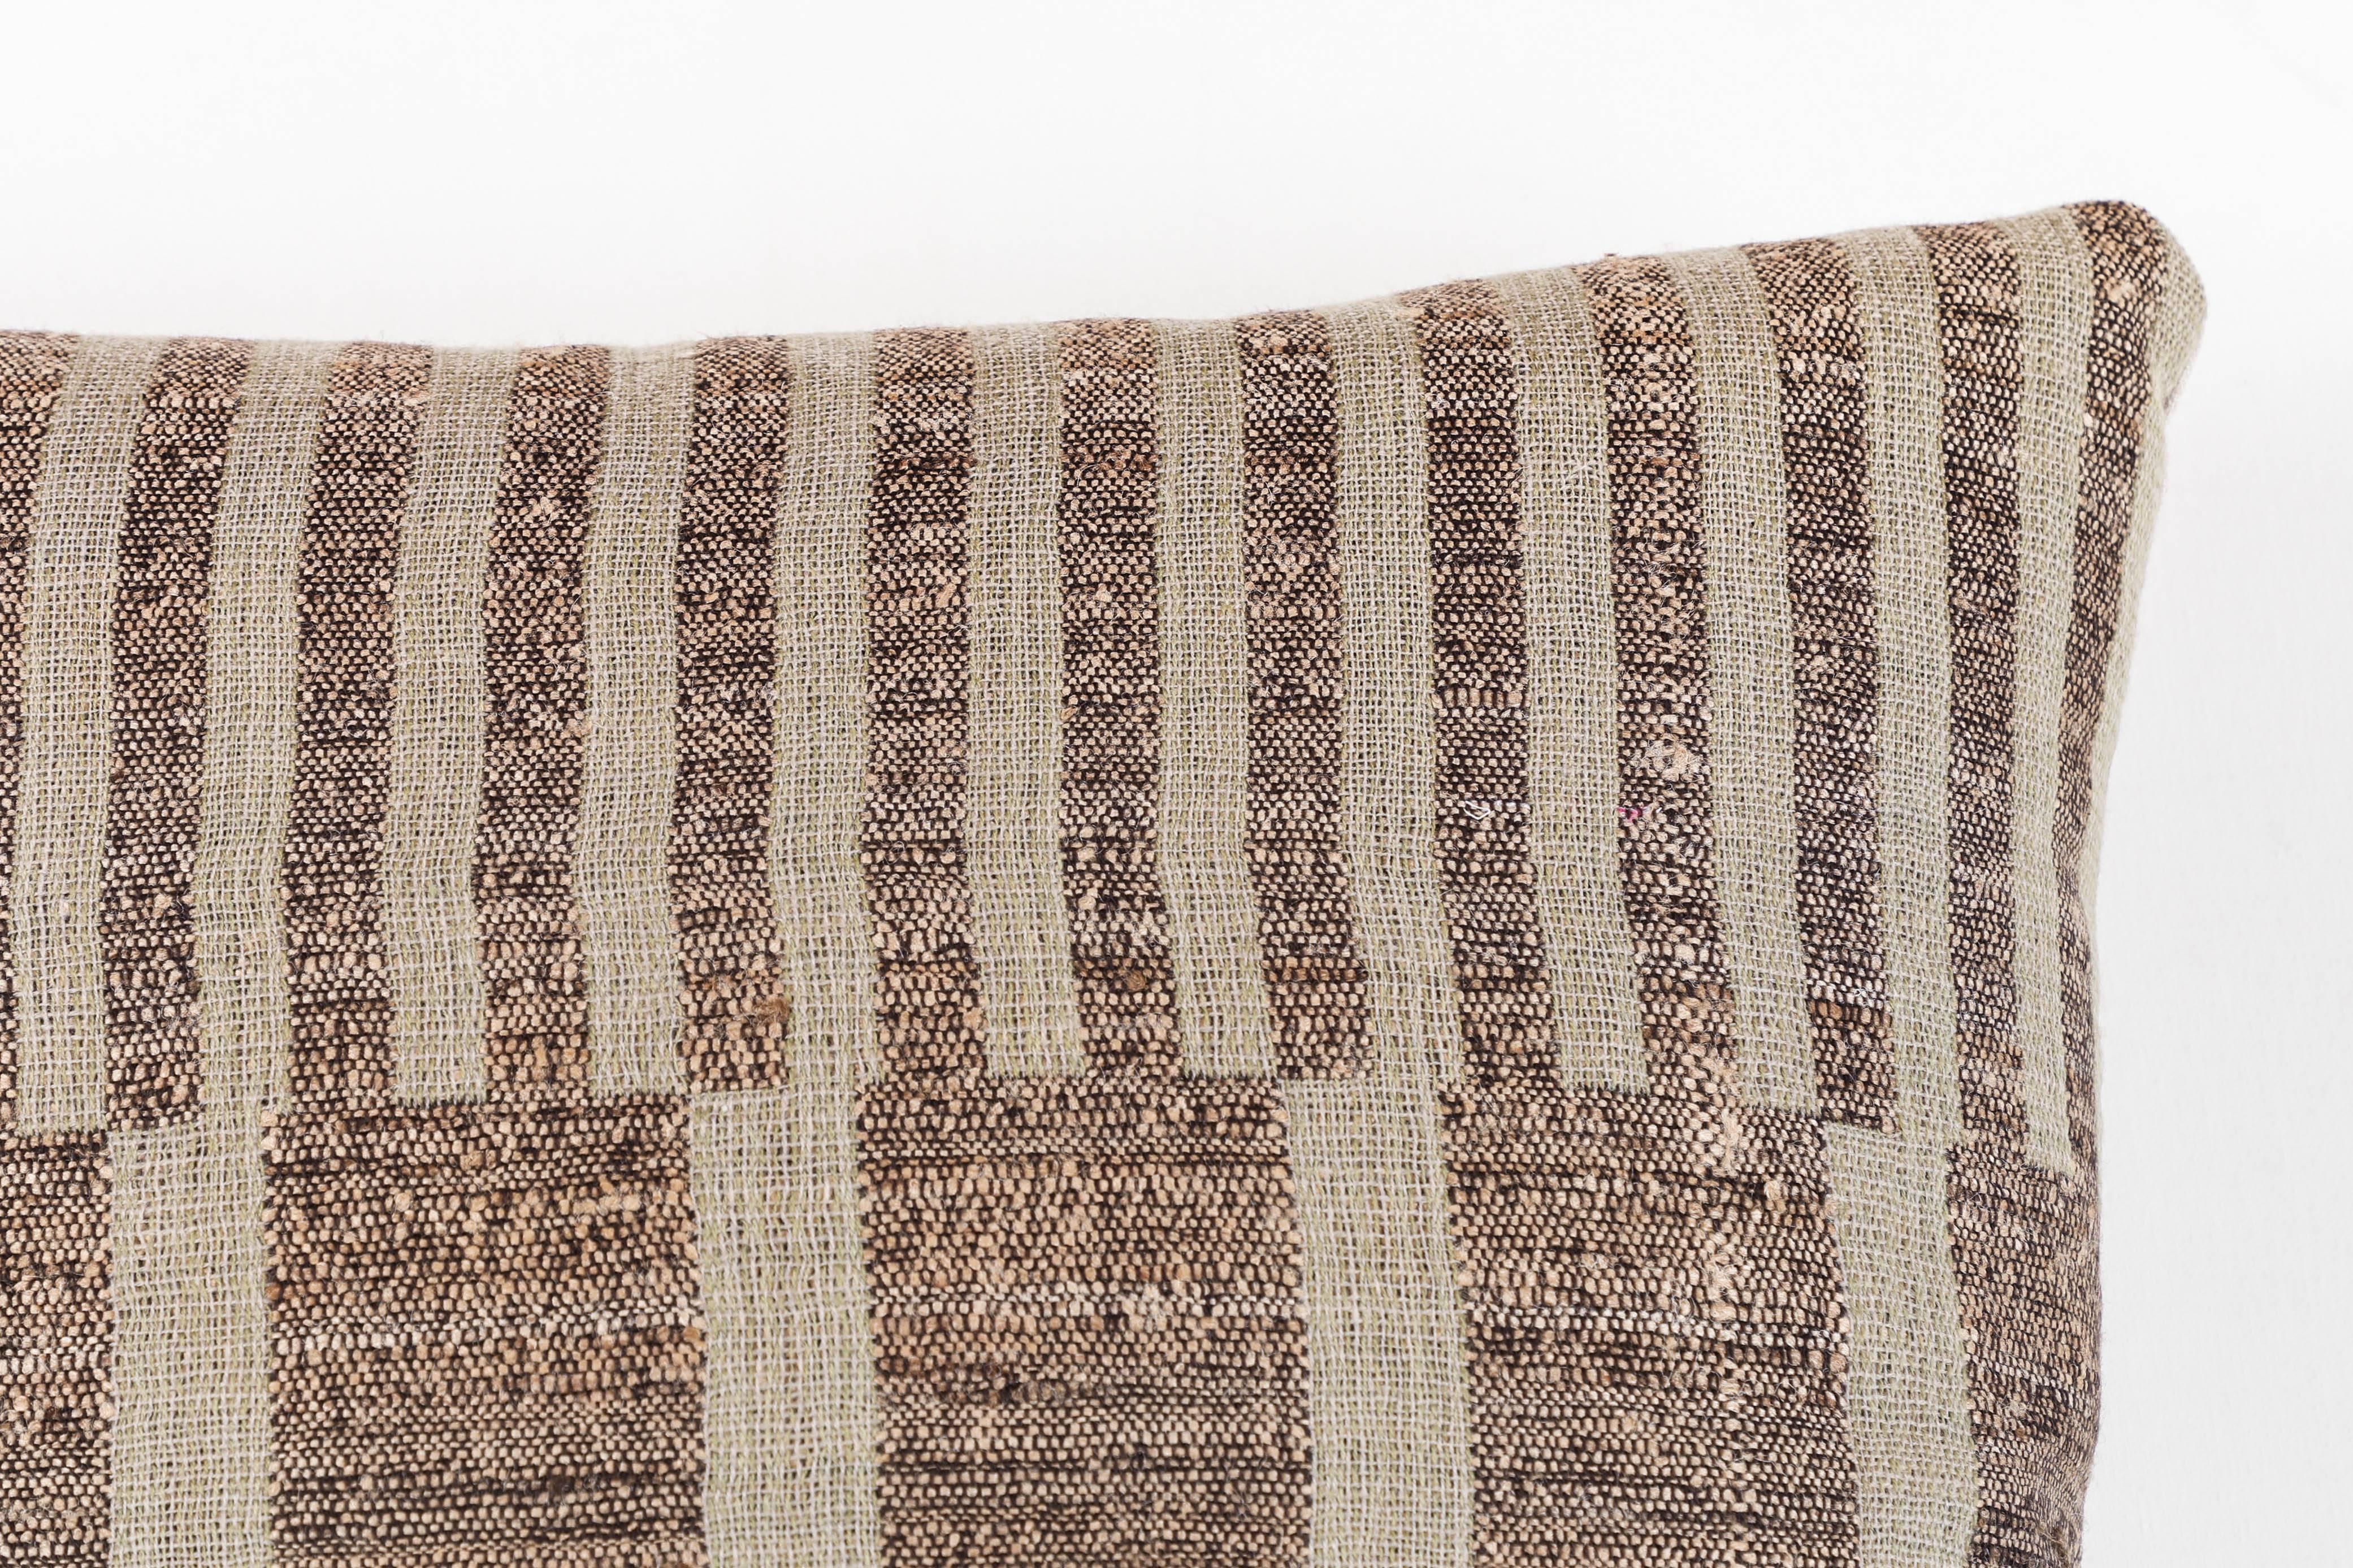 Hand-Woven Indian Handwoven Pillow For Sale